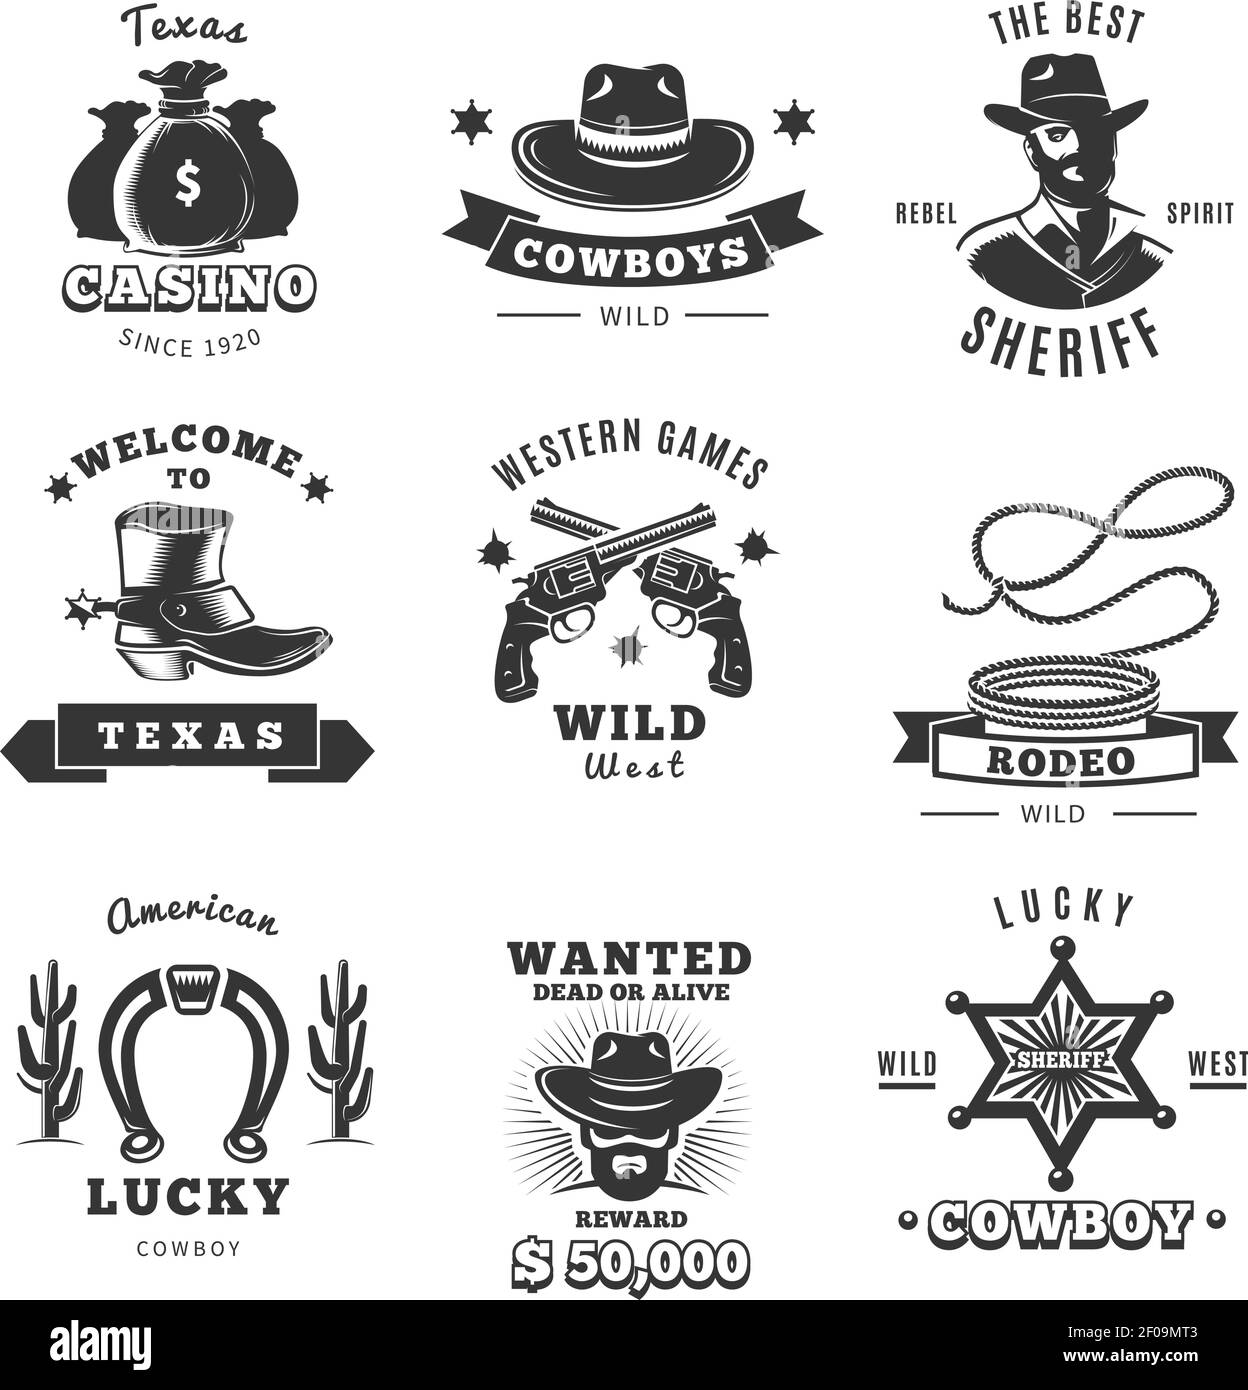 Vintage sheriff label set with texas casino cowboys wild welcome to texas descriptions vector illustration Stock Vector